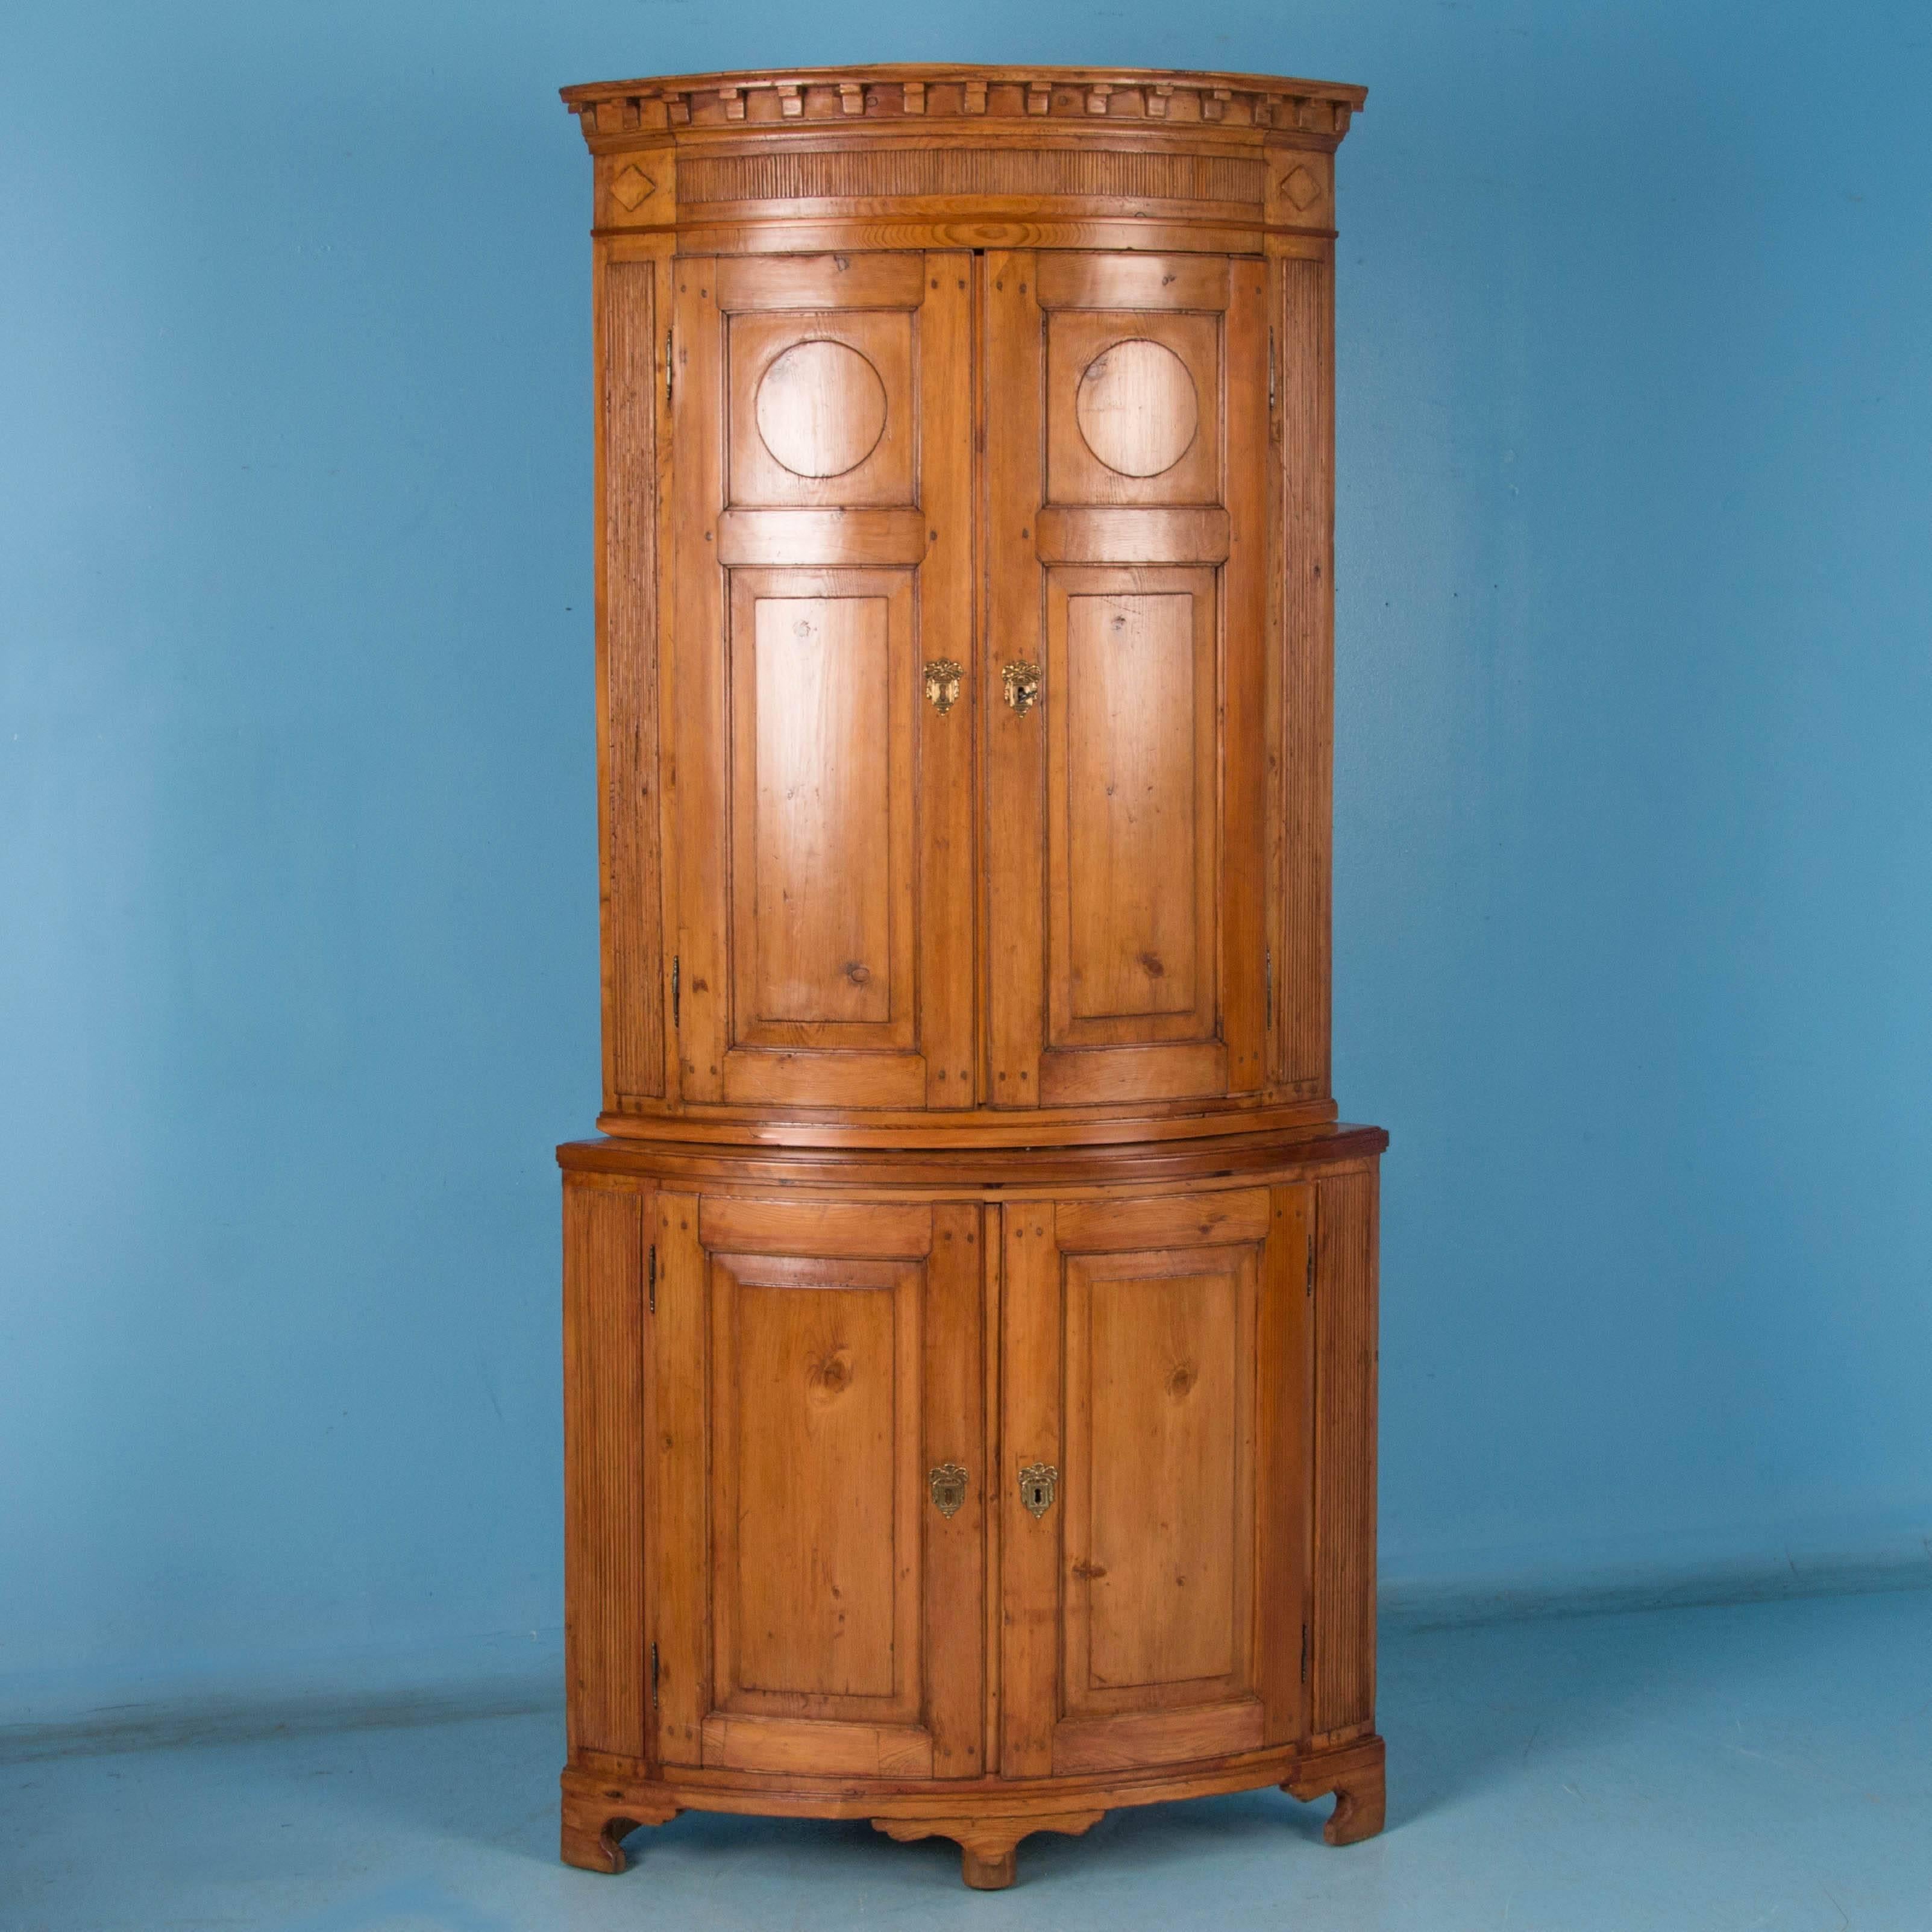 The lovely appeal of this graceful, tall corner cabinet is due to the elegant Louis XVI styling and rich warmth of the deep patina of the aged pine. Notice the fine details, such as the dentil molding of the crown, circular motif inside the top